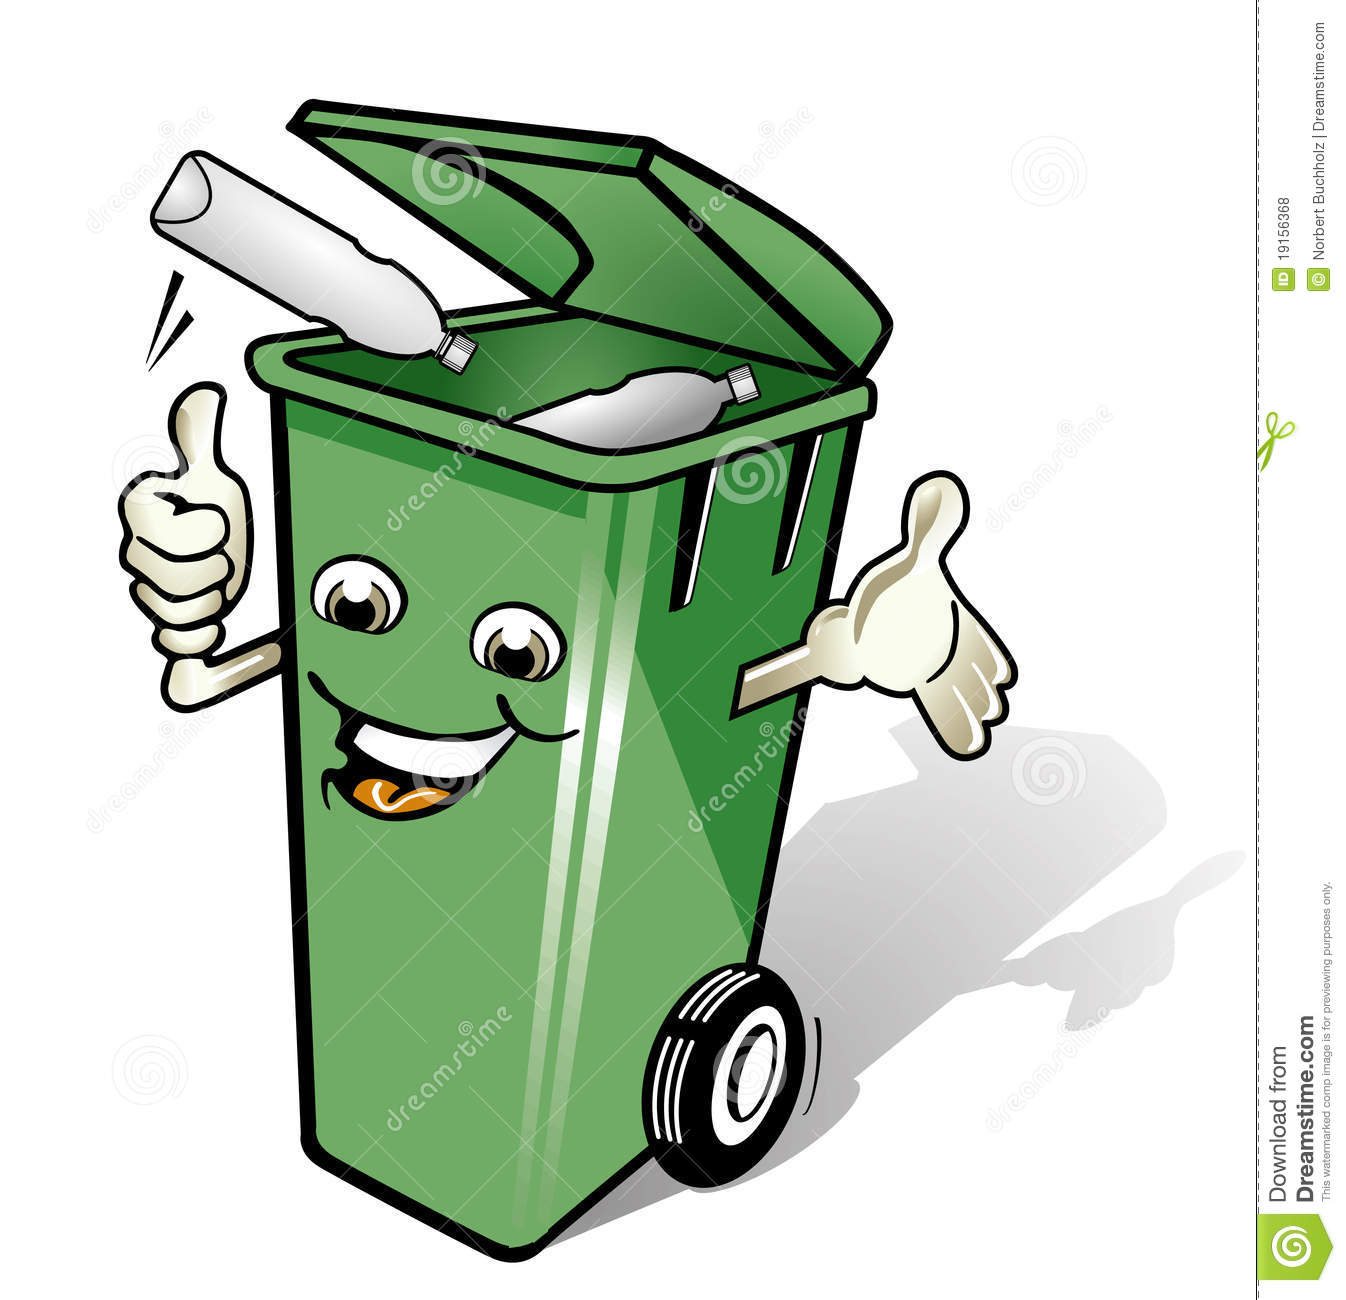 Recycle Bins Royalty Free Stock Photos   Image  19156368